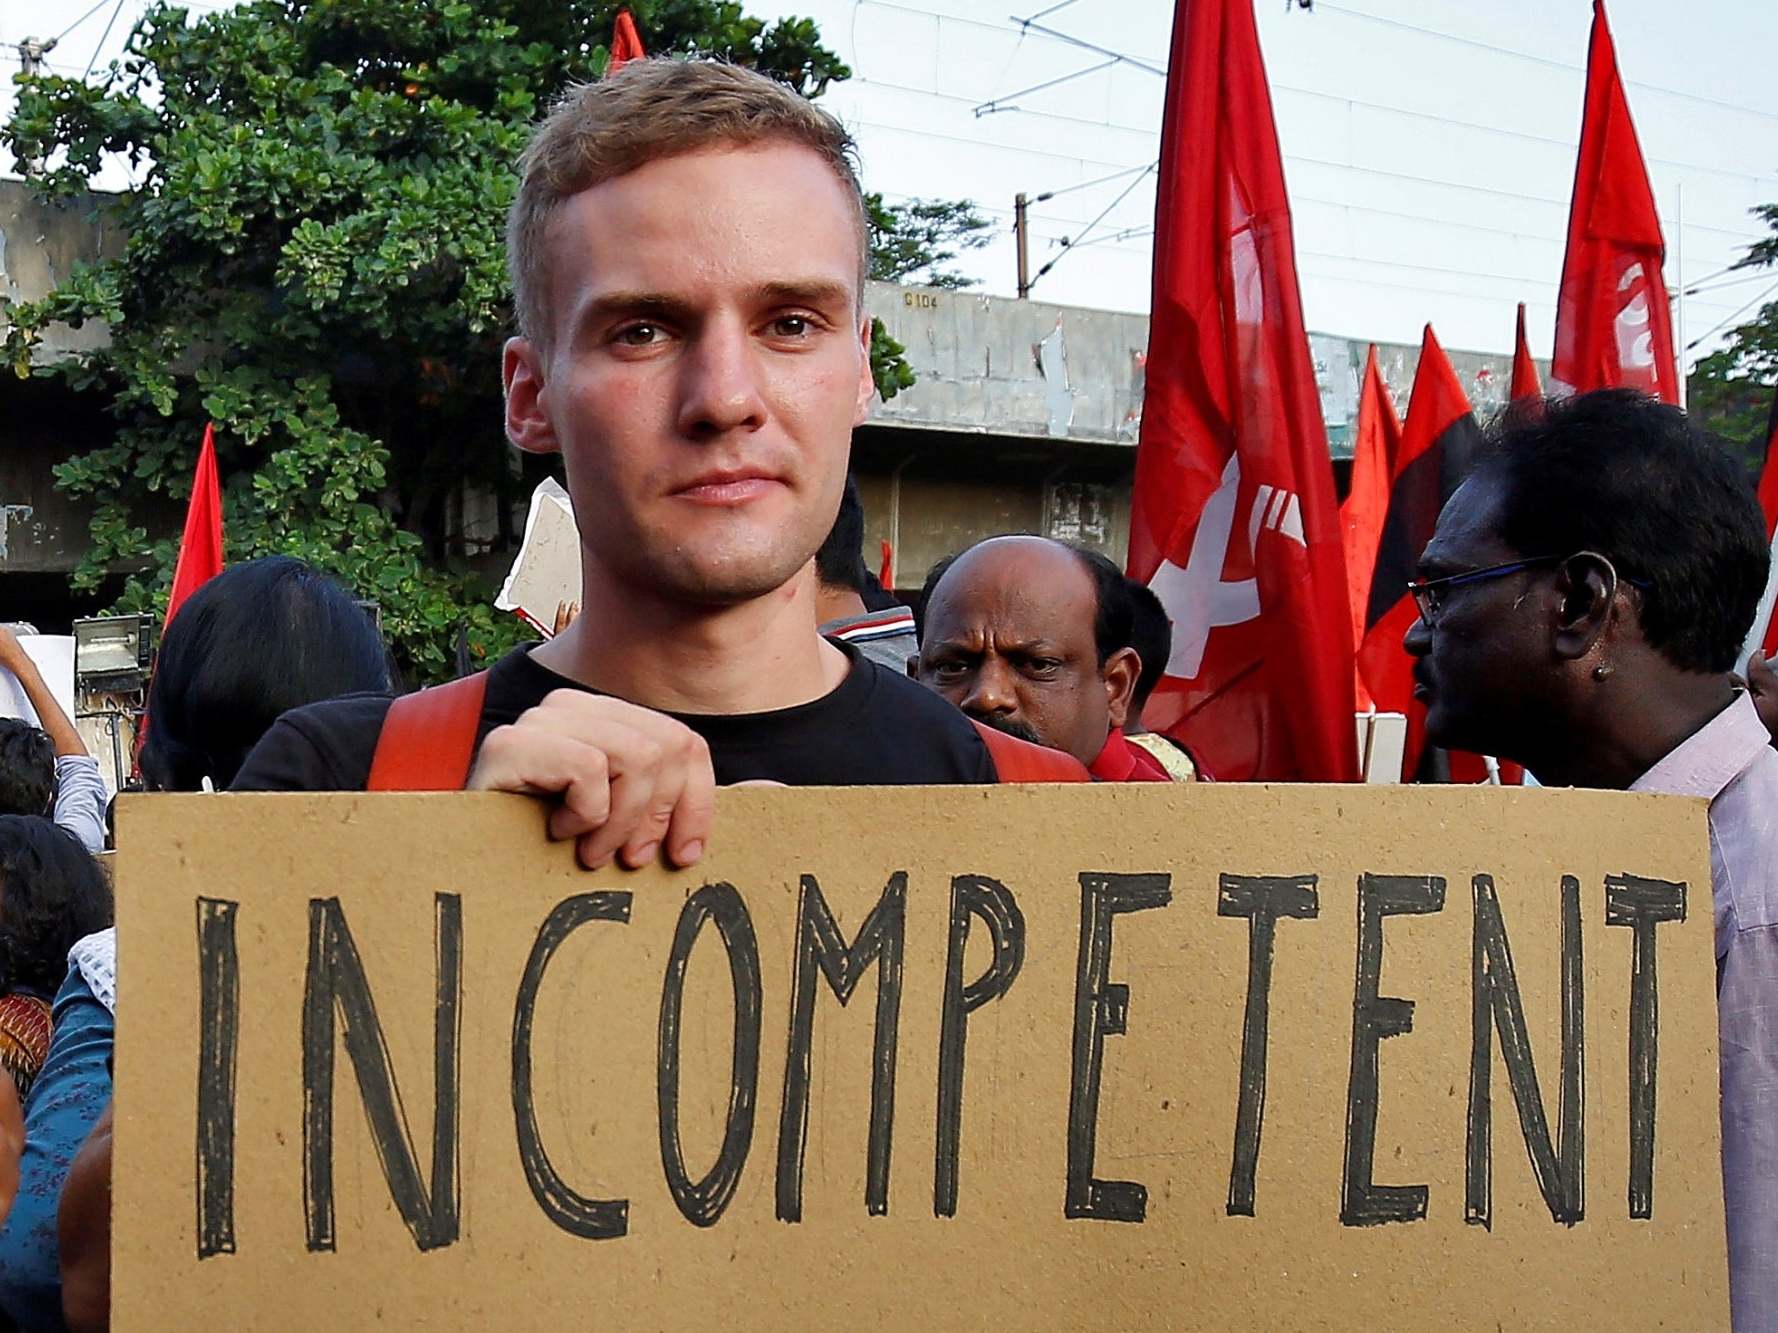 Jakob Lindenthal, a German student, attends a march to show solidarity with the students of New Delhi's Jamia Millia Islamia university after police entered the university campus following a protest against a new citizenship law, in Chennai, India, 16 December, 2019.